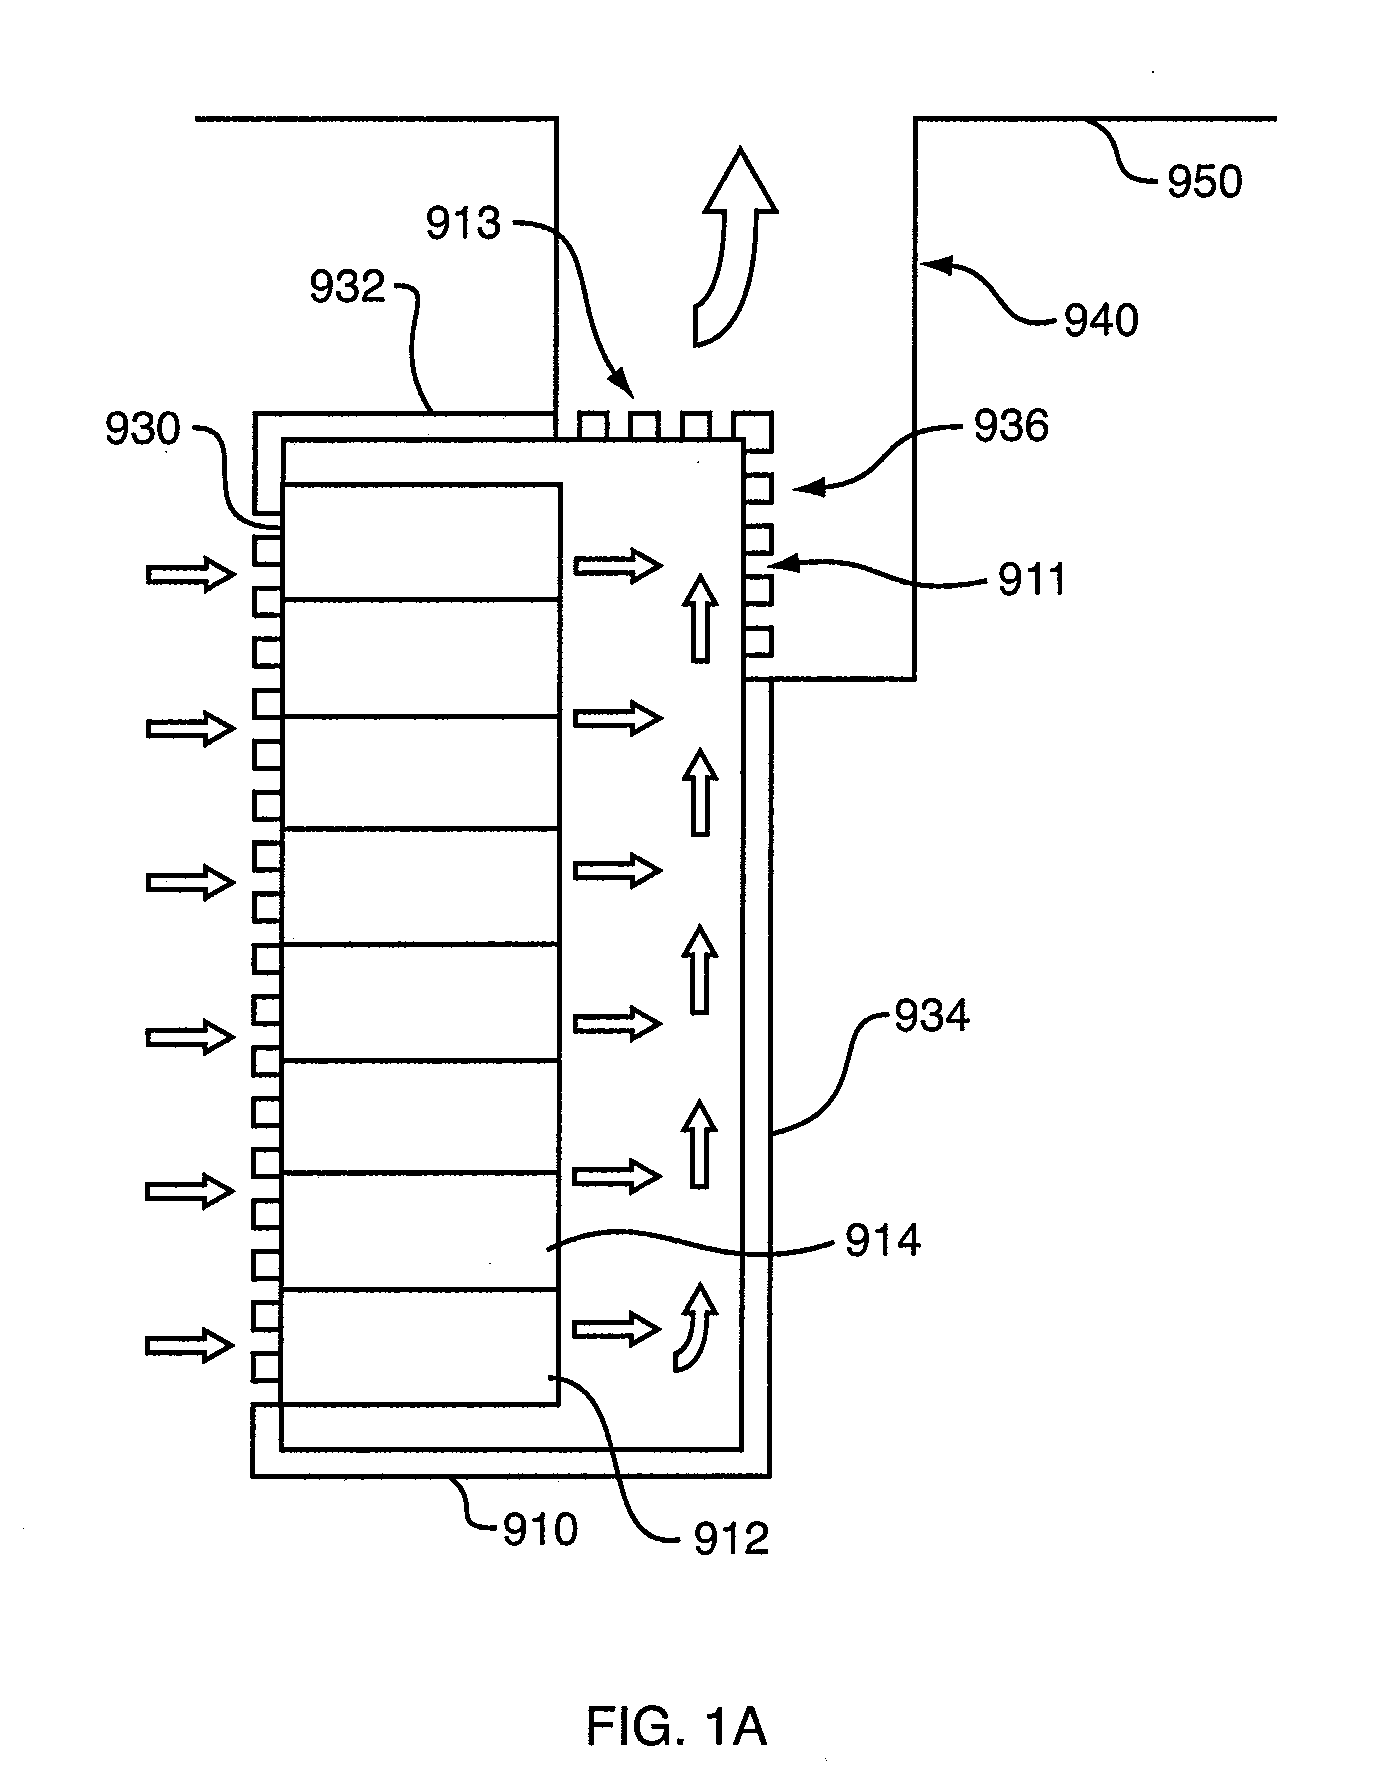 Systems and Methods for Closed Loop Heat Containment with Cold Aisle Isolation for Data Center Cooling